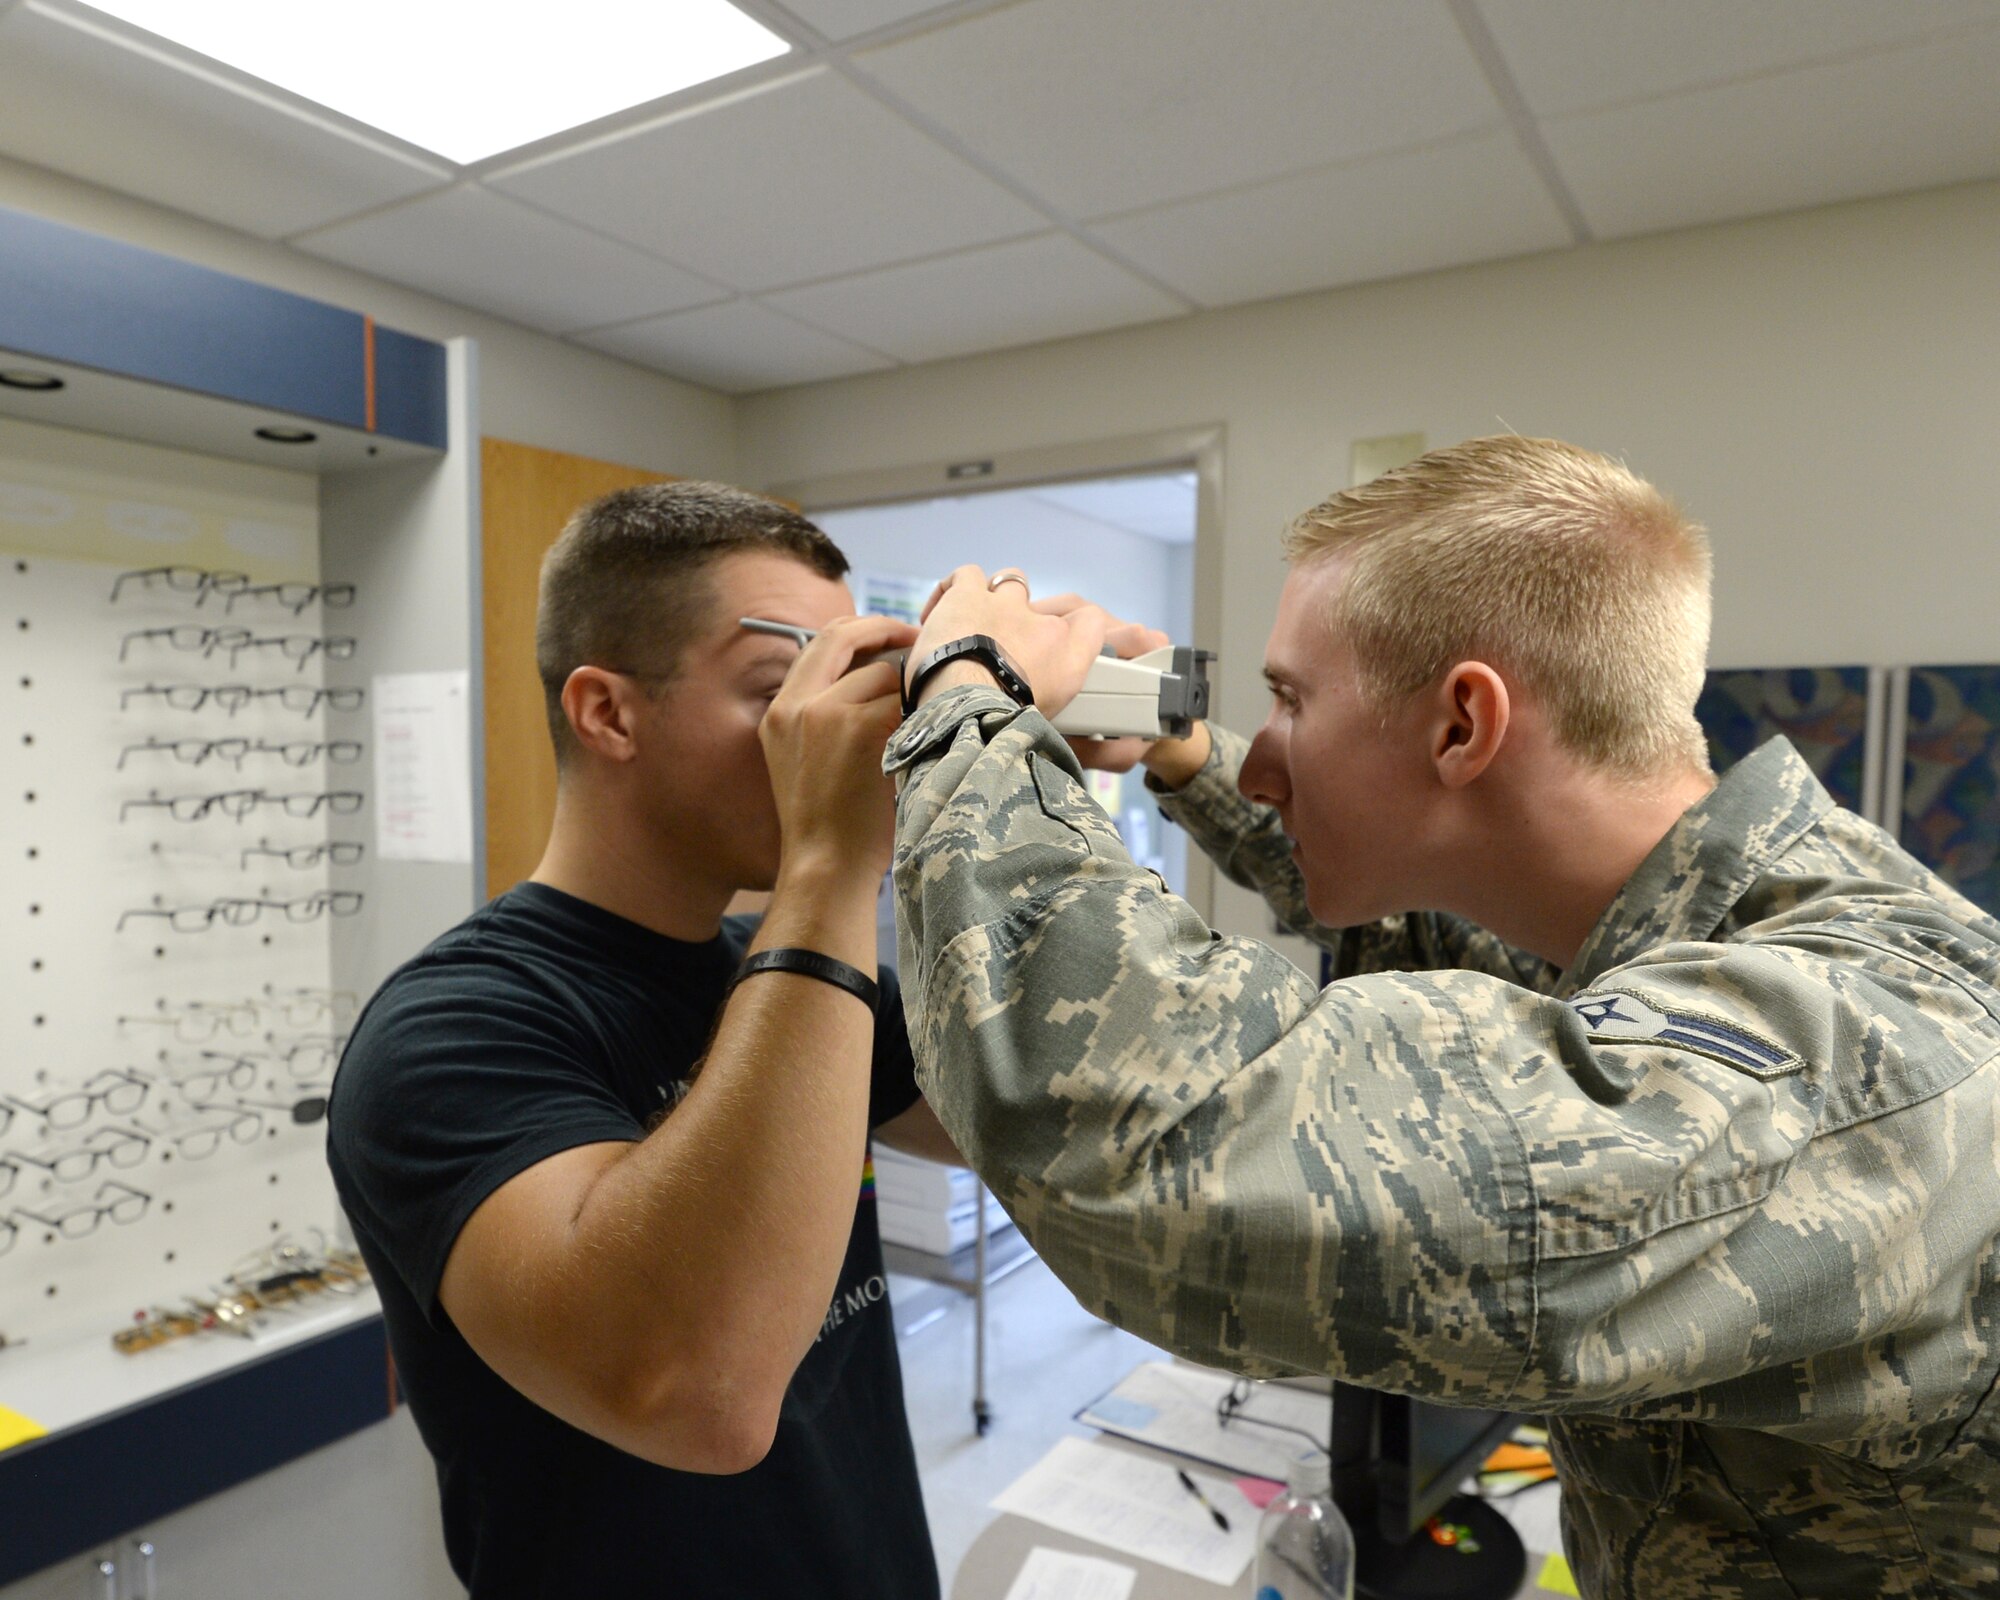 Airman 1st Class Jordan Cutaia, 325th Aerospace Medicine Squadron optometry technician, uses a device to gauge a patient’s eyesight Sept. 30.  Optometry technicians like Cutaia are responsible for processing eyewear prescriptions for military spectacles; they also perform and manage optometry clinic activities. 325th AMDS provide medical, dental, and preventive care, enabling all wing and associate units to maximize readiness and combat capability. (U.S. Air Force photo by Airman 1st Class Cody R. Miller/Released)